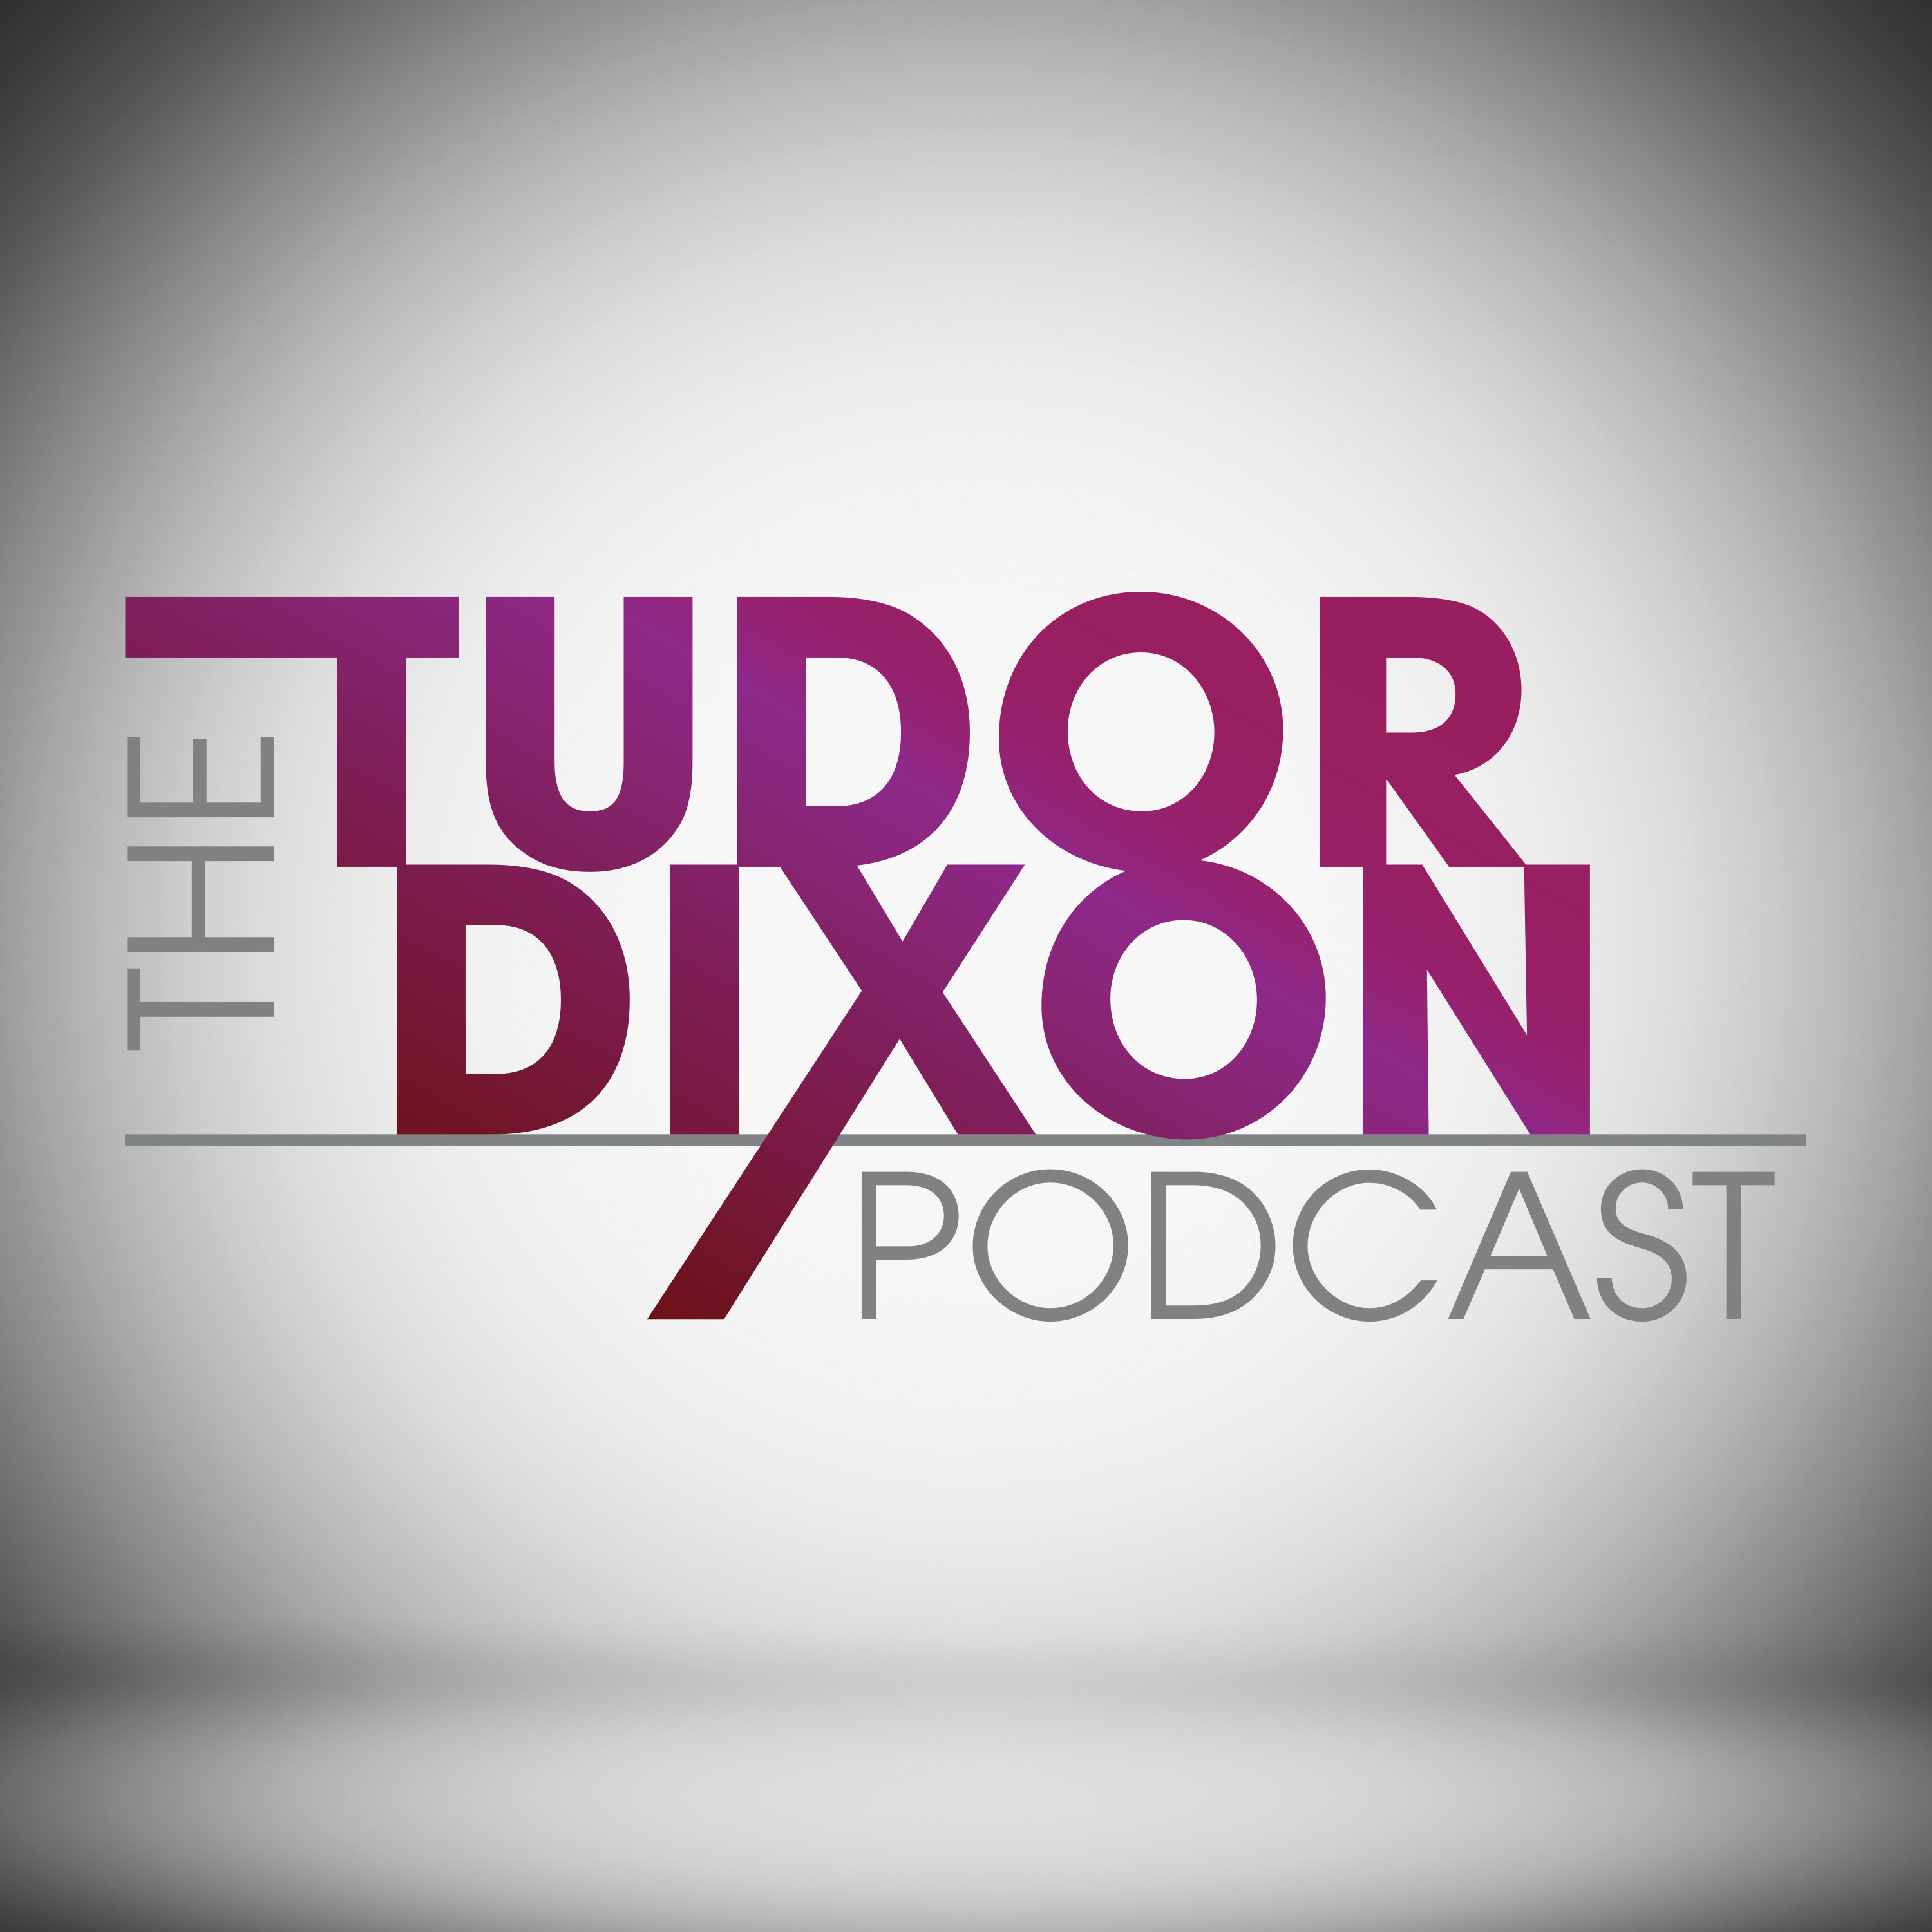 The Tudor Dixon Podcast: A Touch of Kindness with Janice Dean